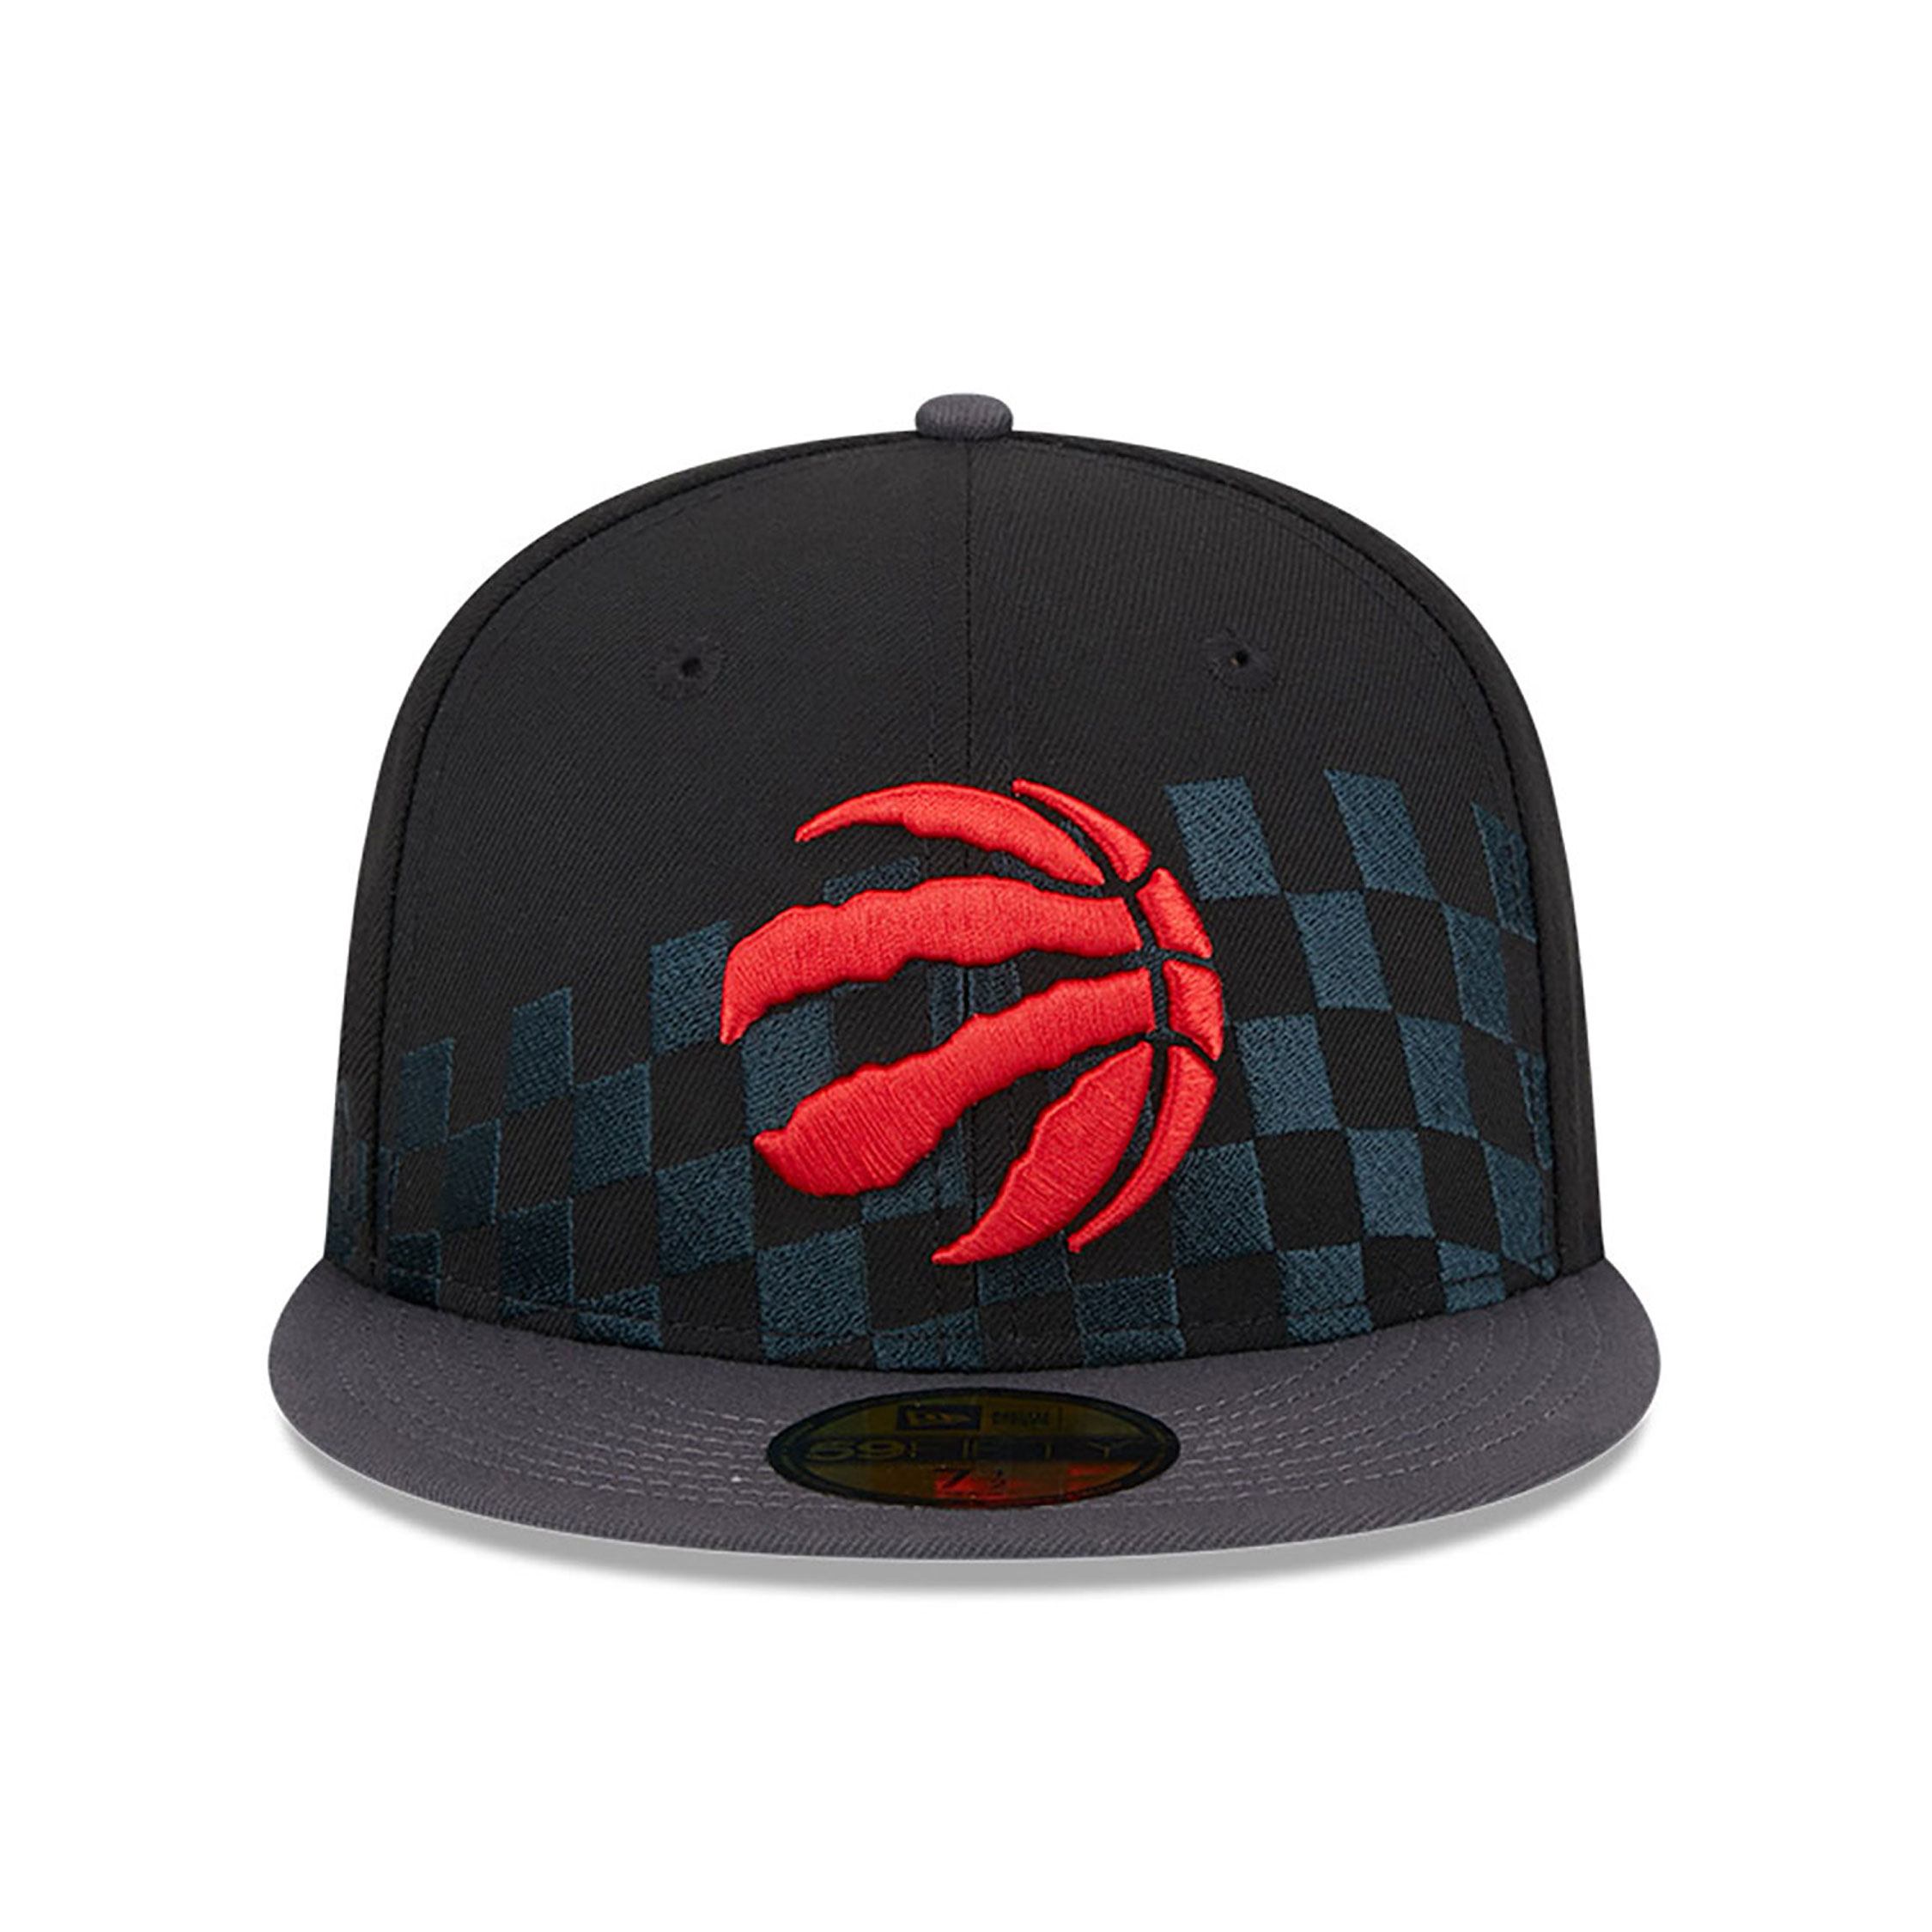 Toronto Raptors NBA Rally Drive Black 59FIFTY Fitted Cap